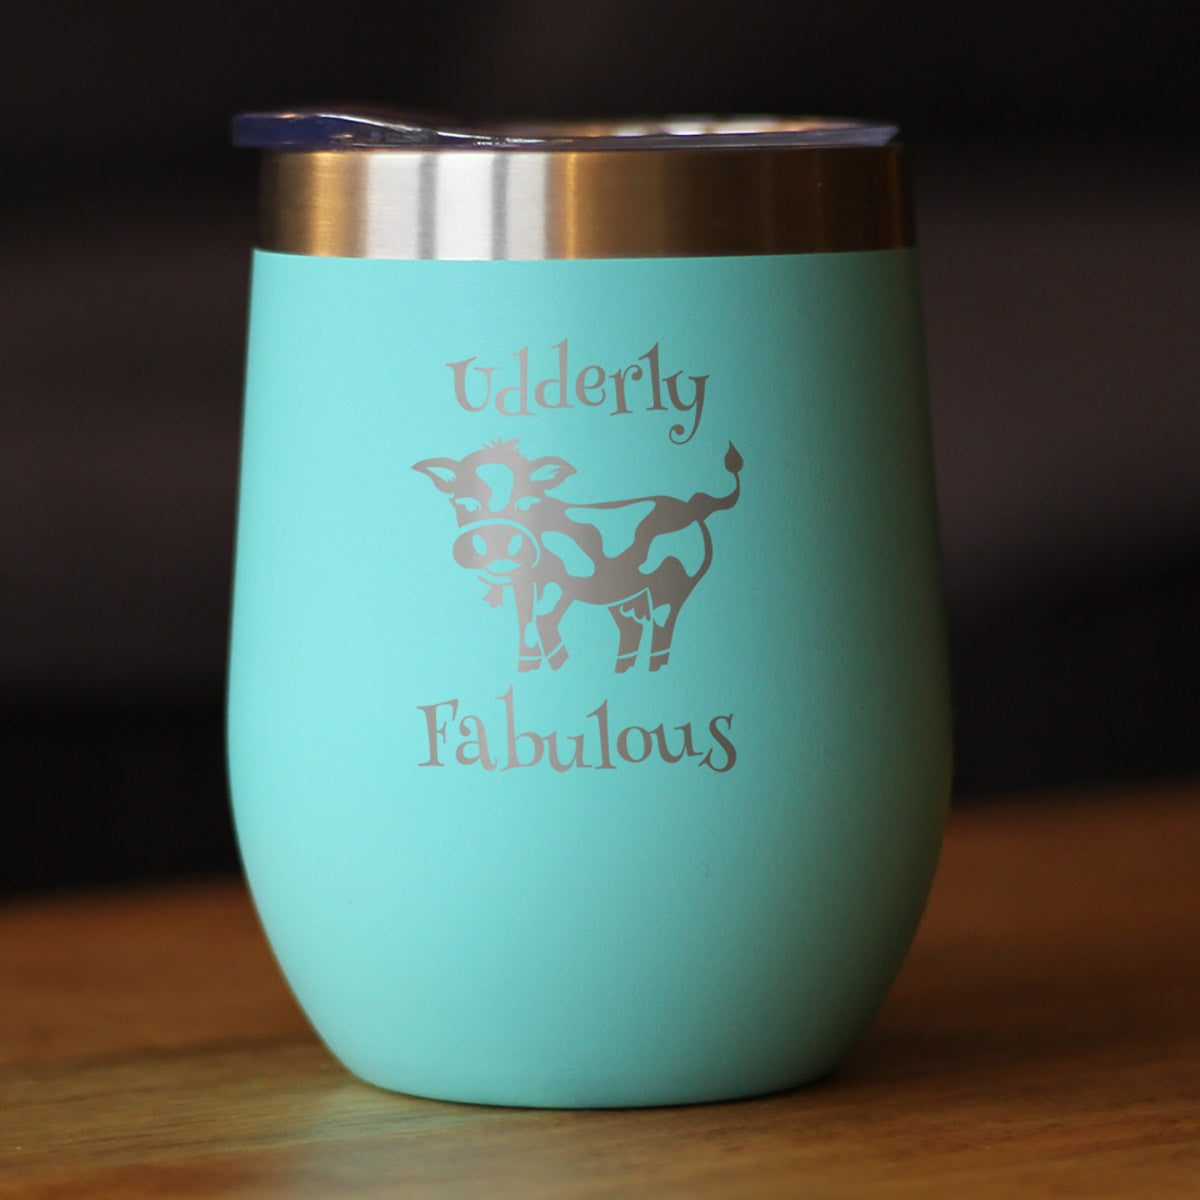 Udderly Fabulous - Cow Wine Tumbler with Sliding Lid - Stemless Stainless Steel Insulated Cup - Funny Outdoor Camping Mug